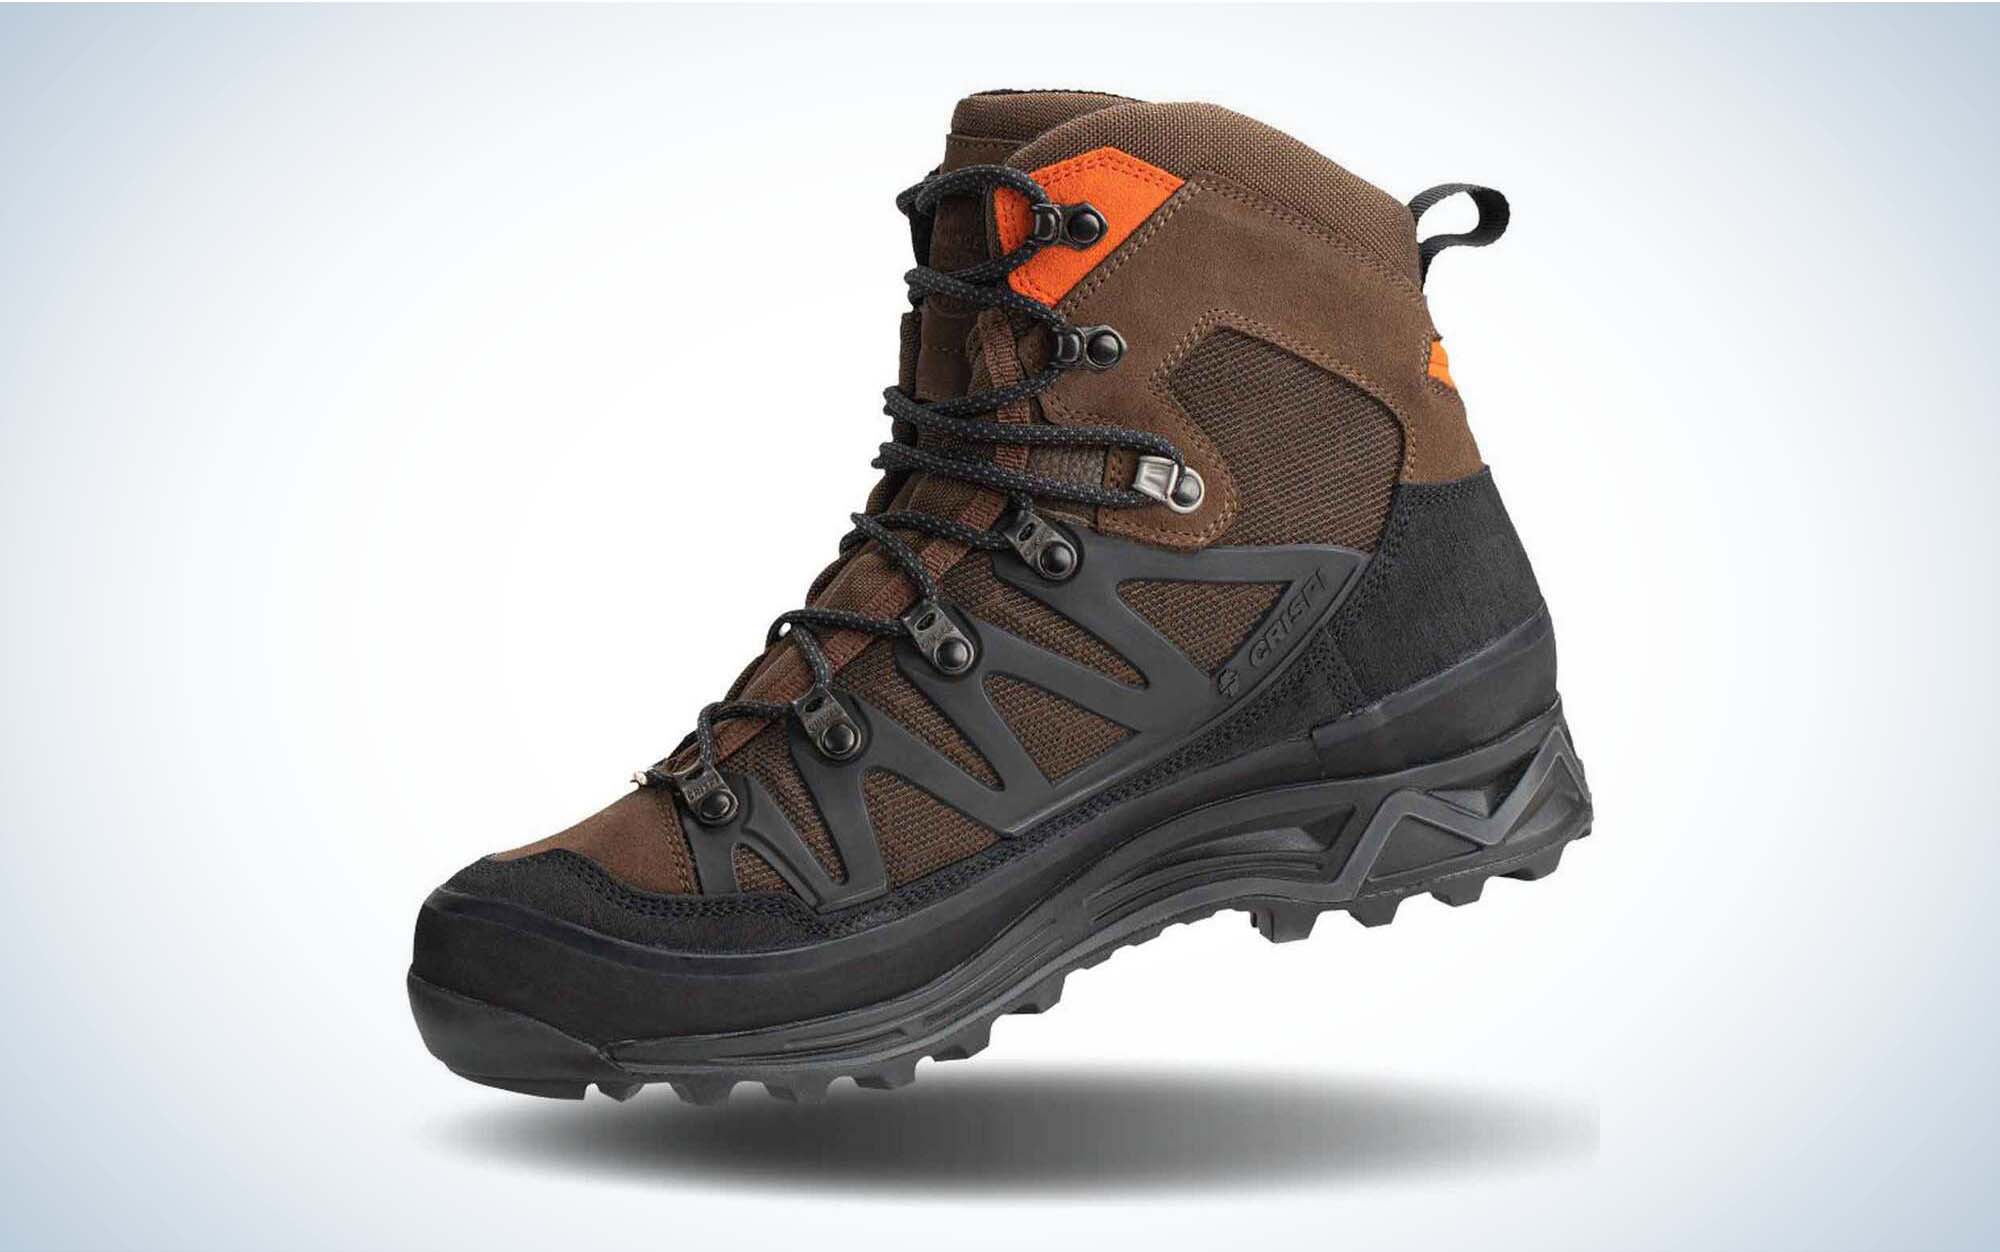 The Crispi Wyoming II GTX is the best western upland hunting boot.